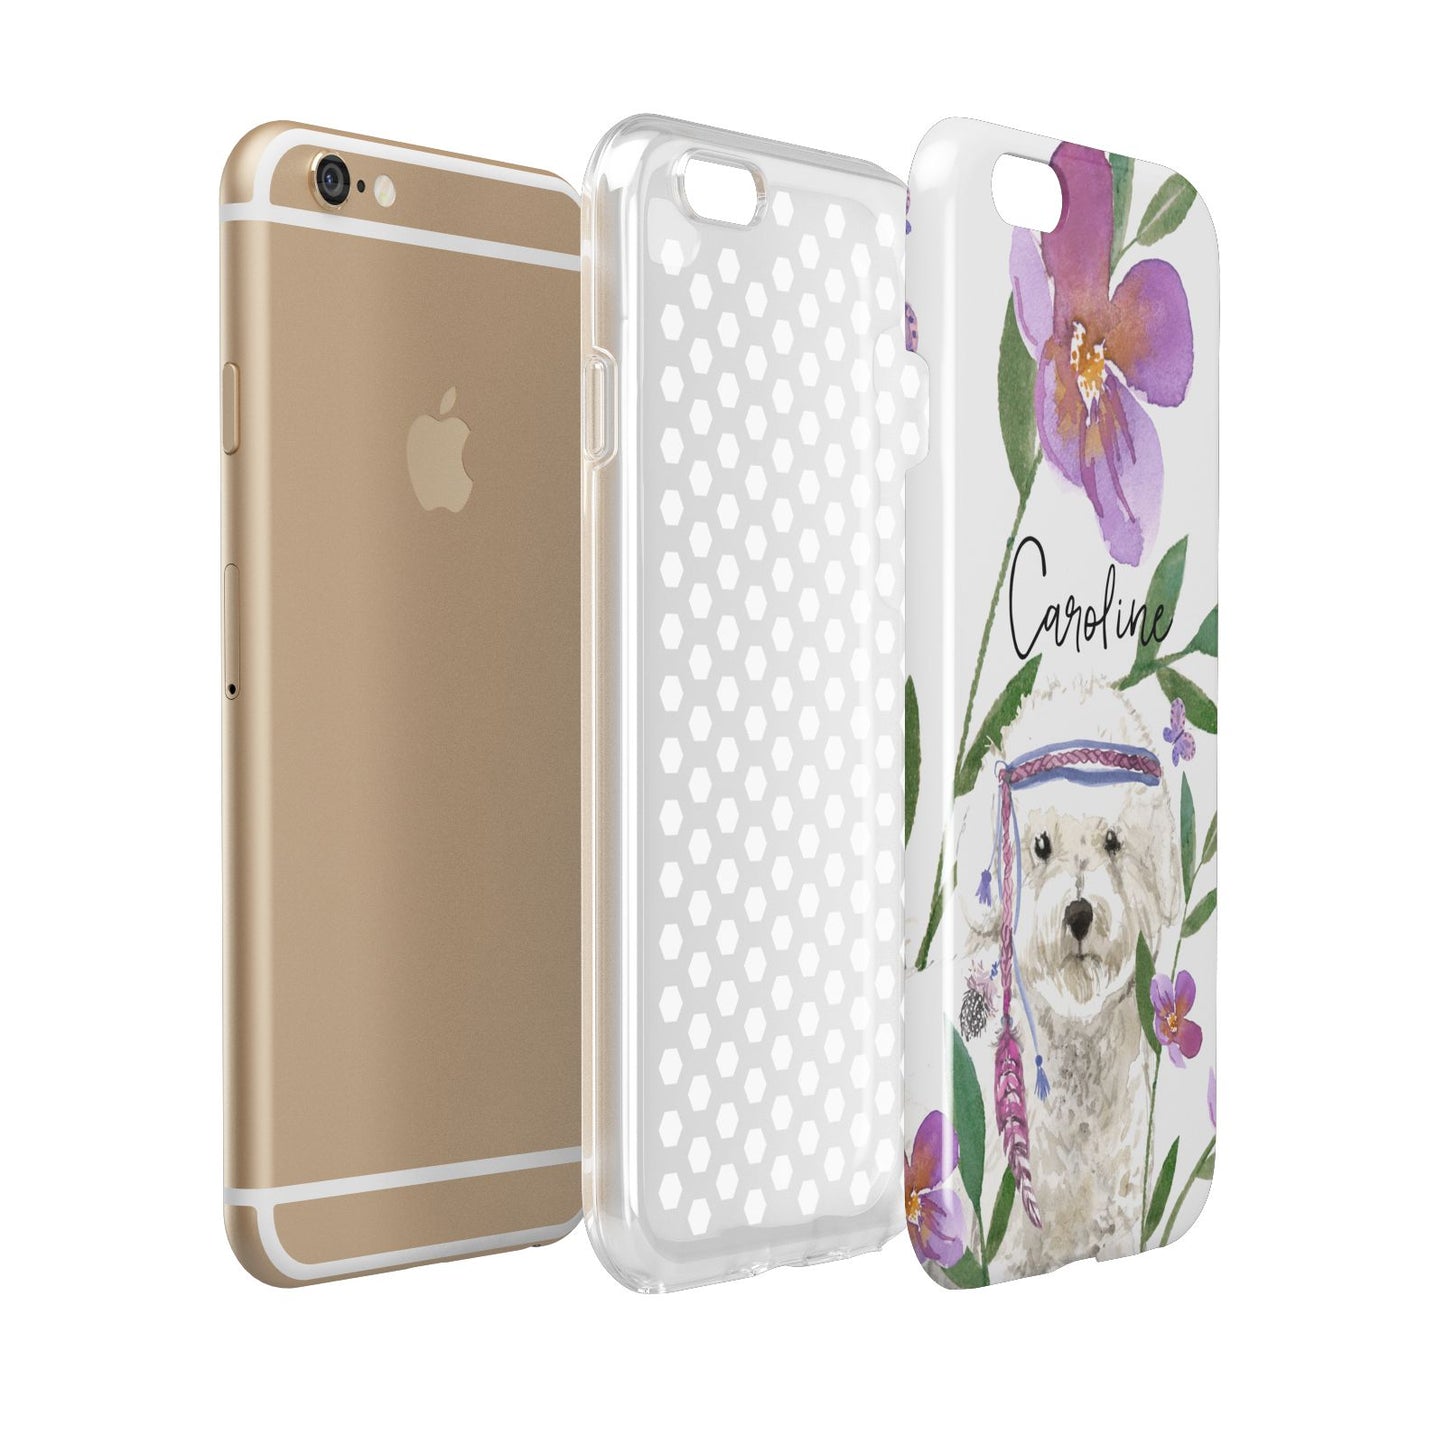 Personalised Bichon Frise Apple iPhone 6 3D Tough Case Expanded view